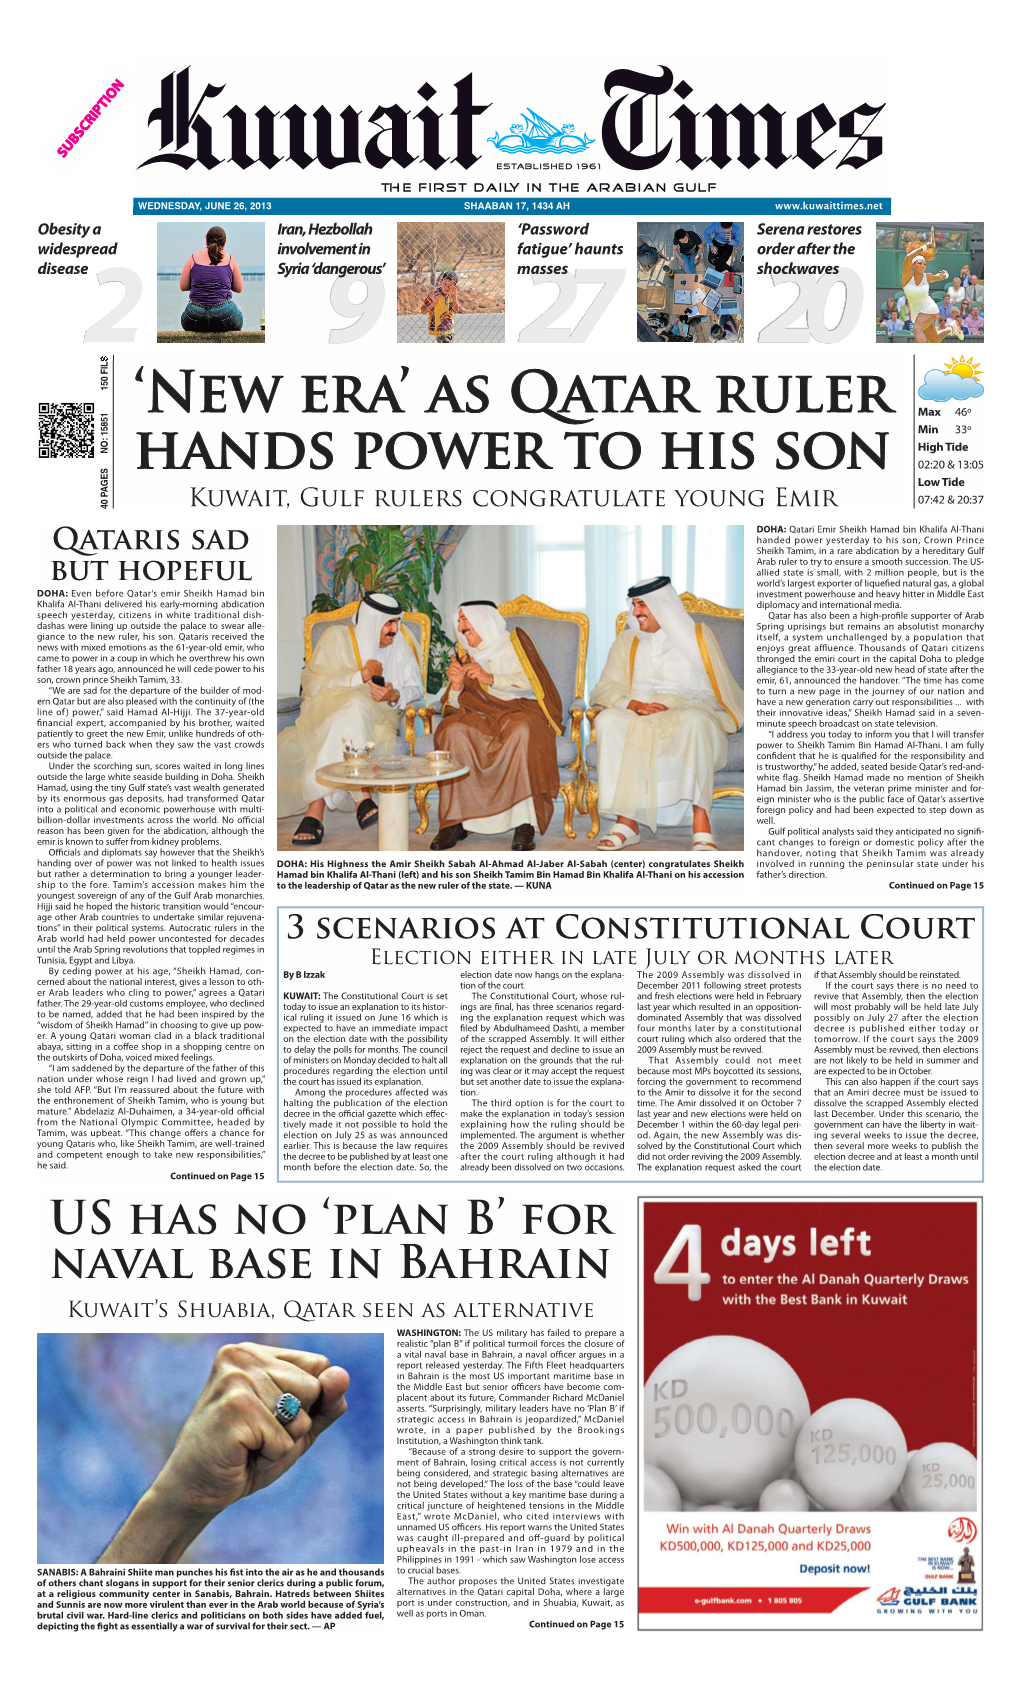 AS Qatar RULER Hands Power to His